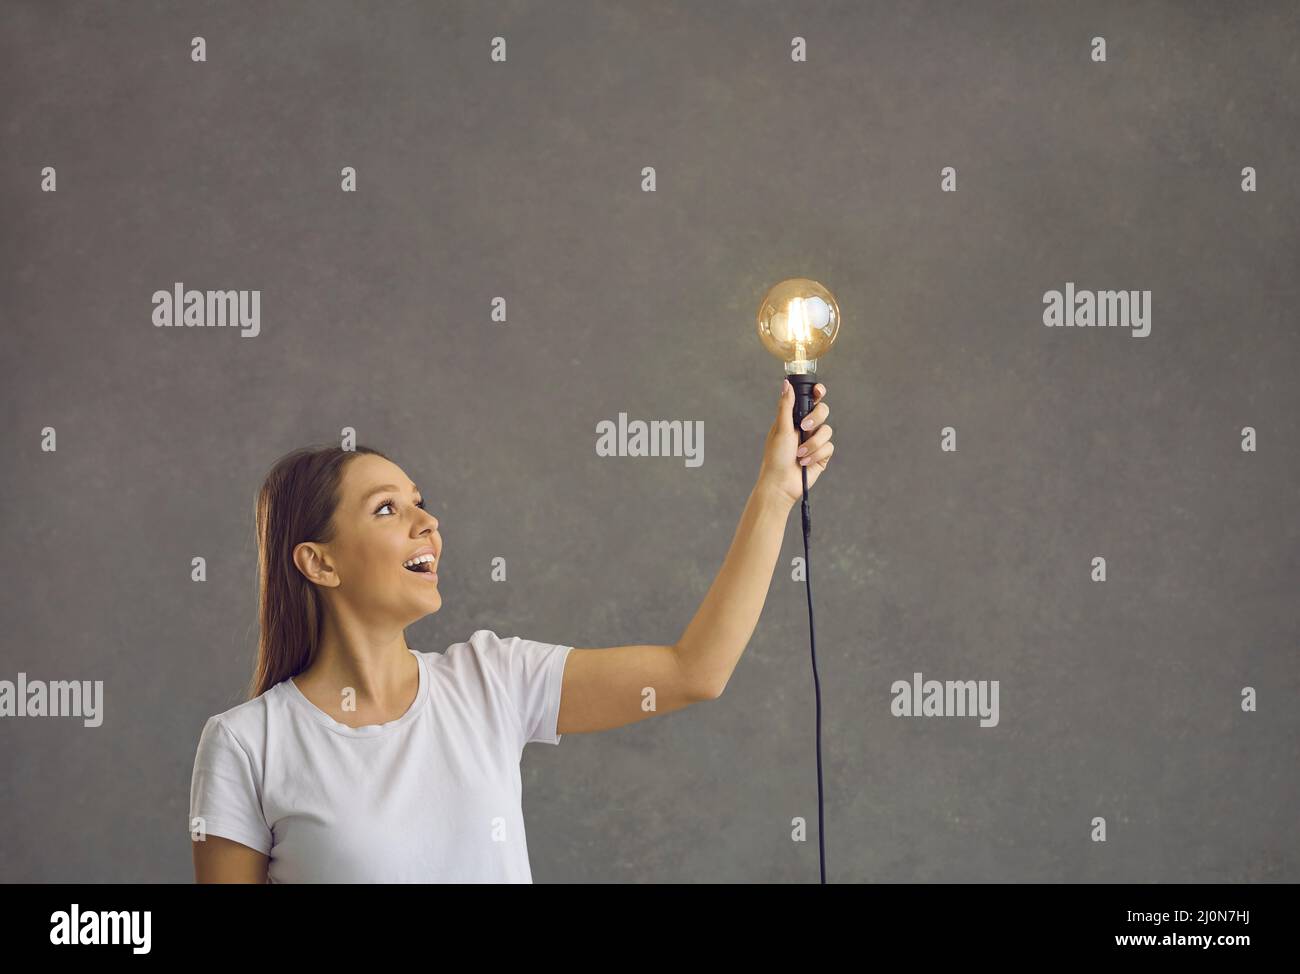 Charming smiling cute young woman holding a light bulb in her left hand smiling and looking at her. Stock Photo